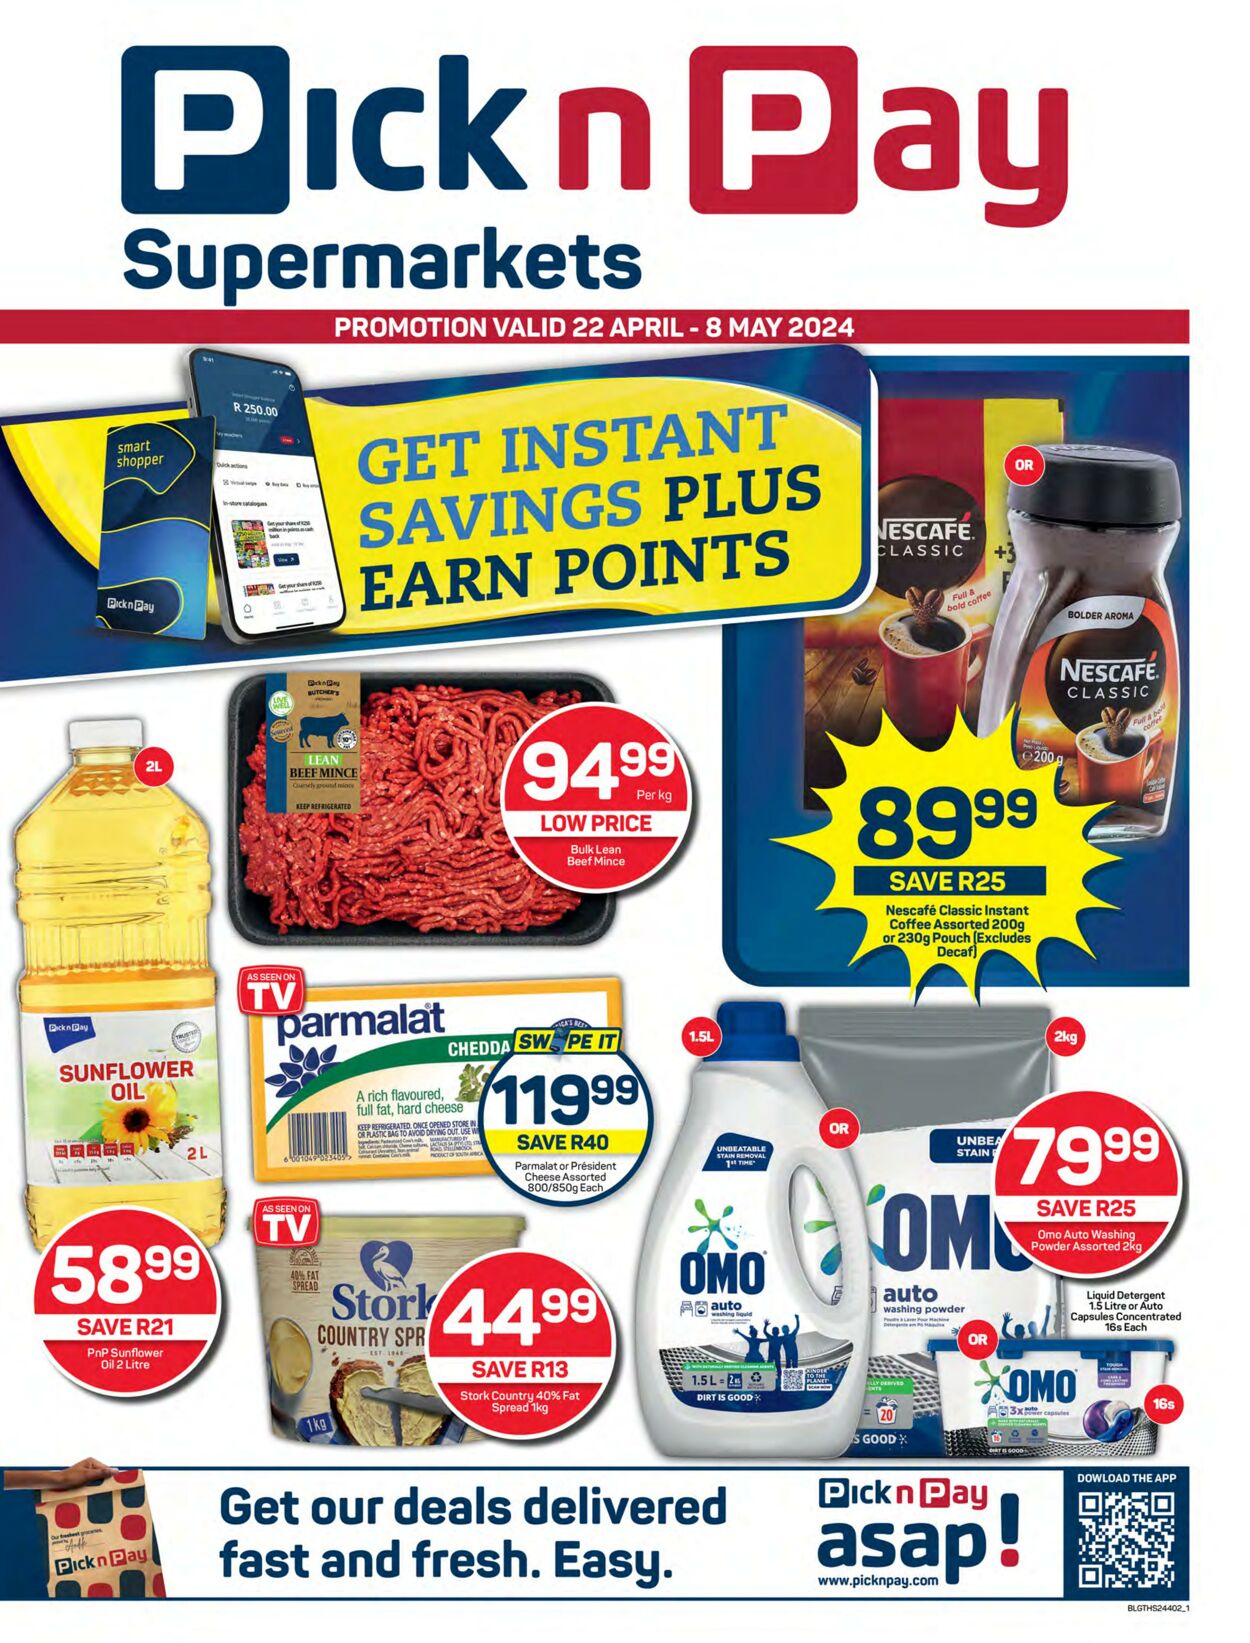 Special Pick n Pay - Pick n Pay 22 Apr, 2024 - 8 May, 2024